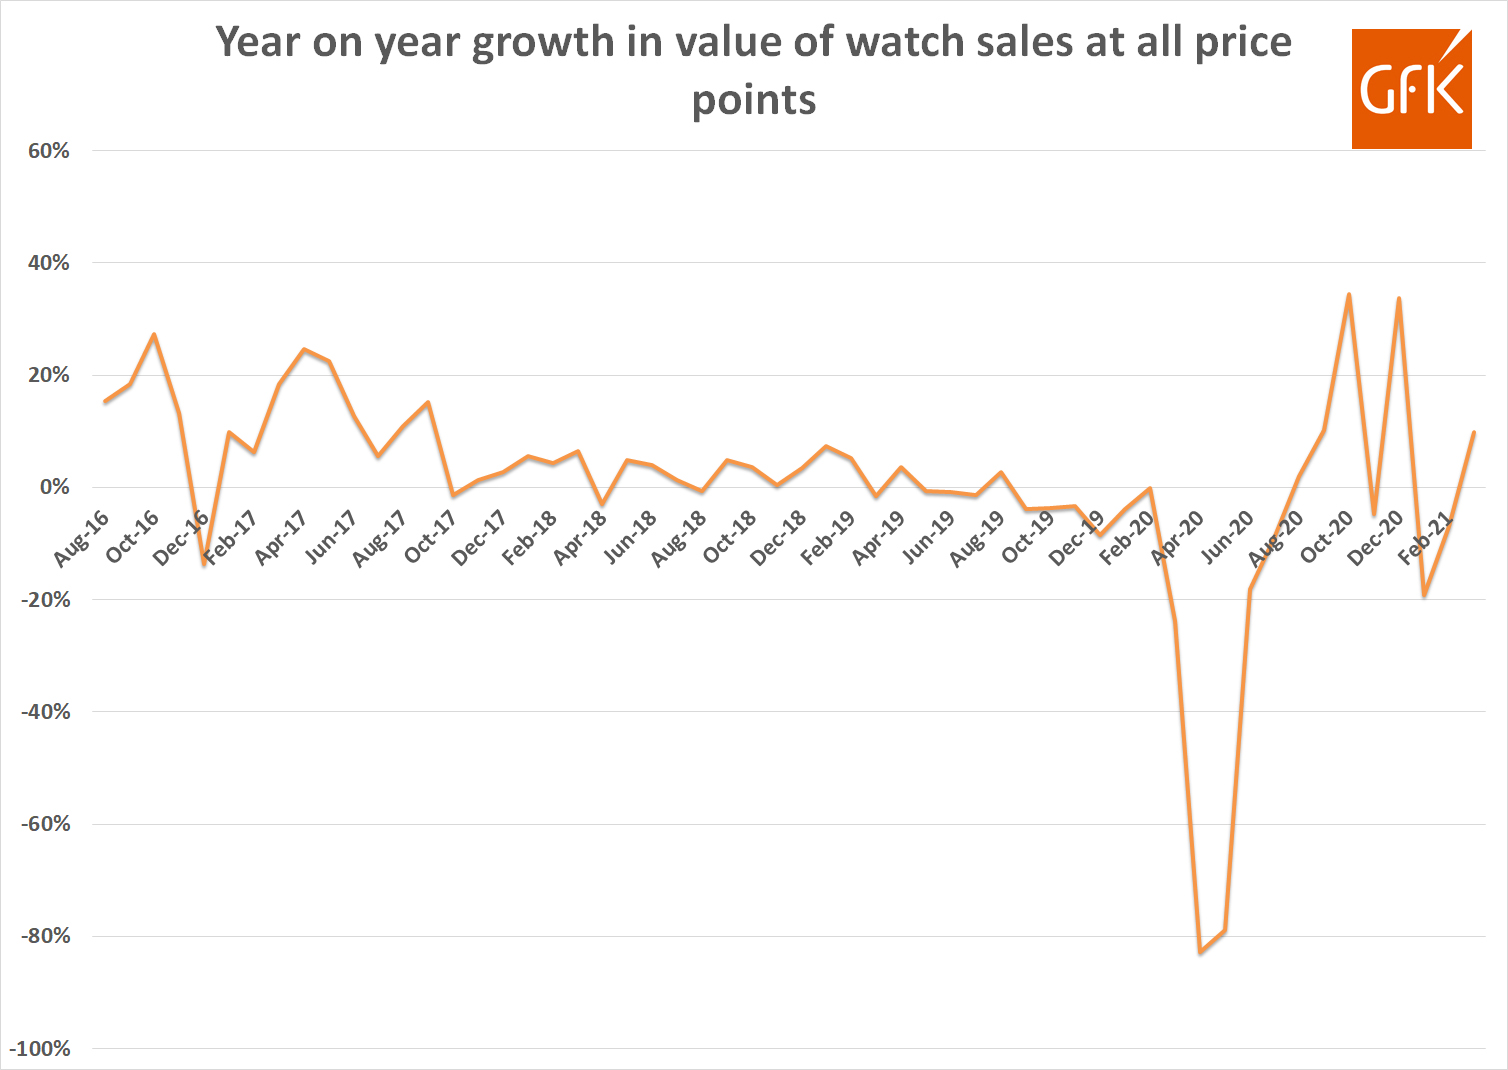 Gfk yoy growth in sales all price points